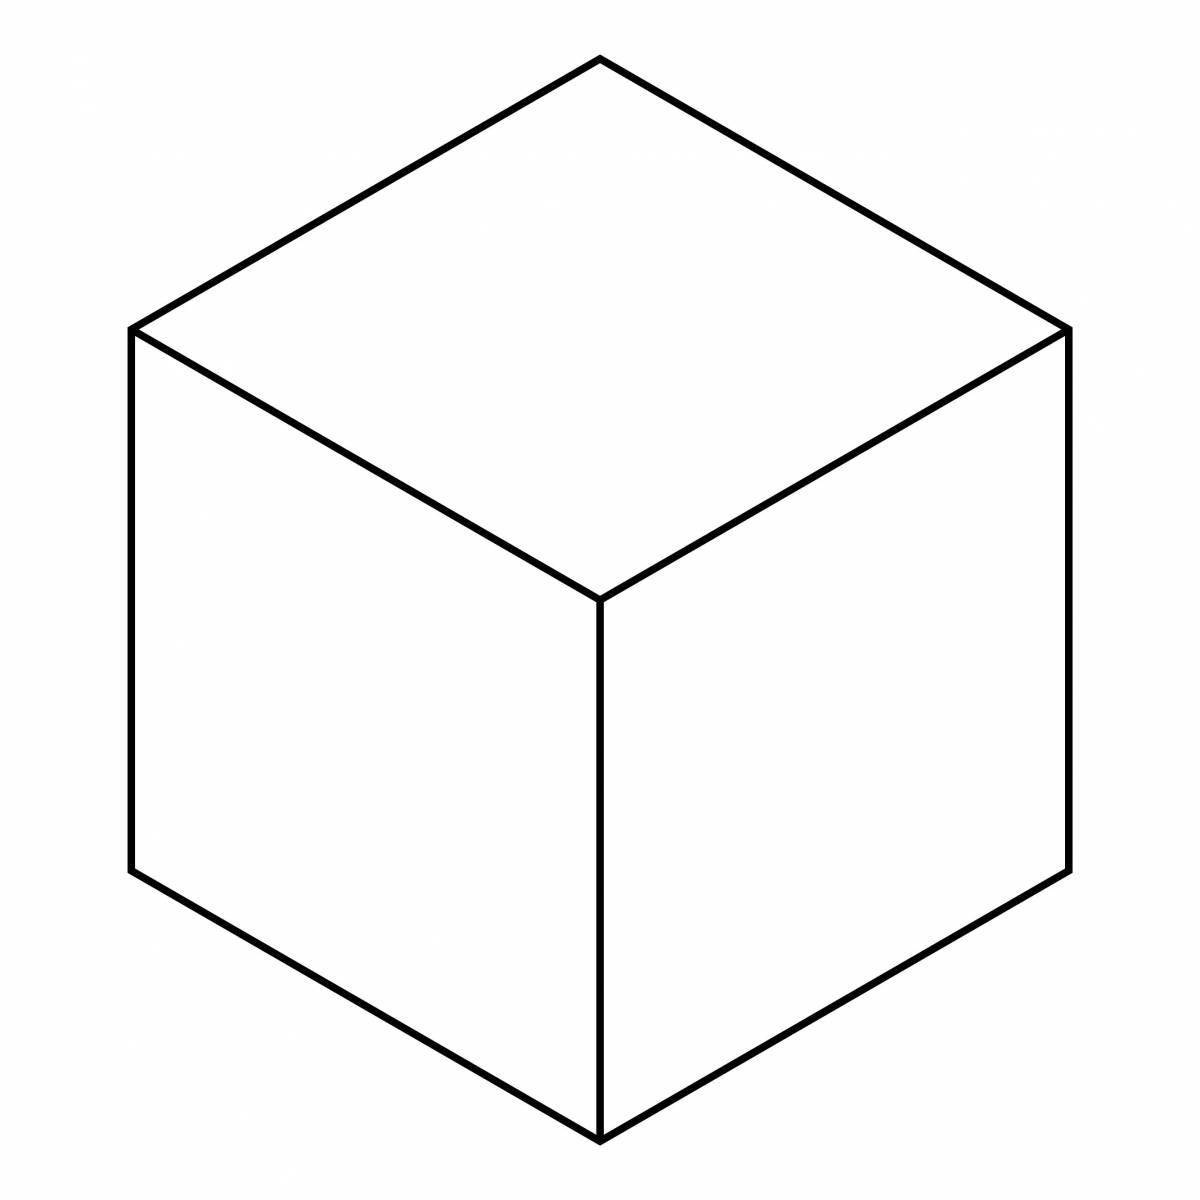 Cube for kids #16